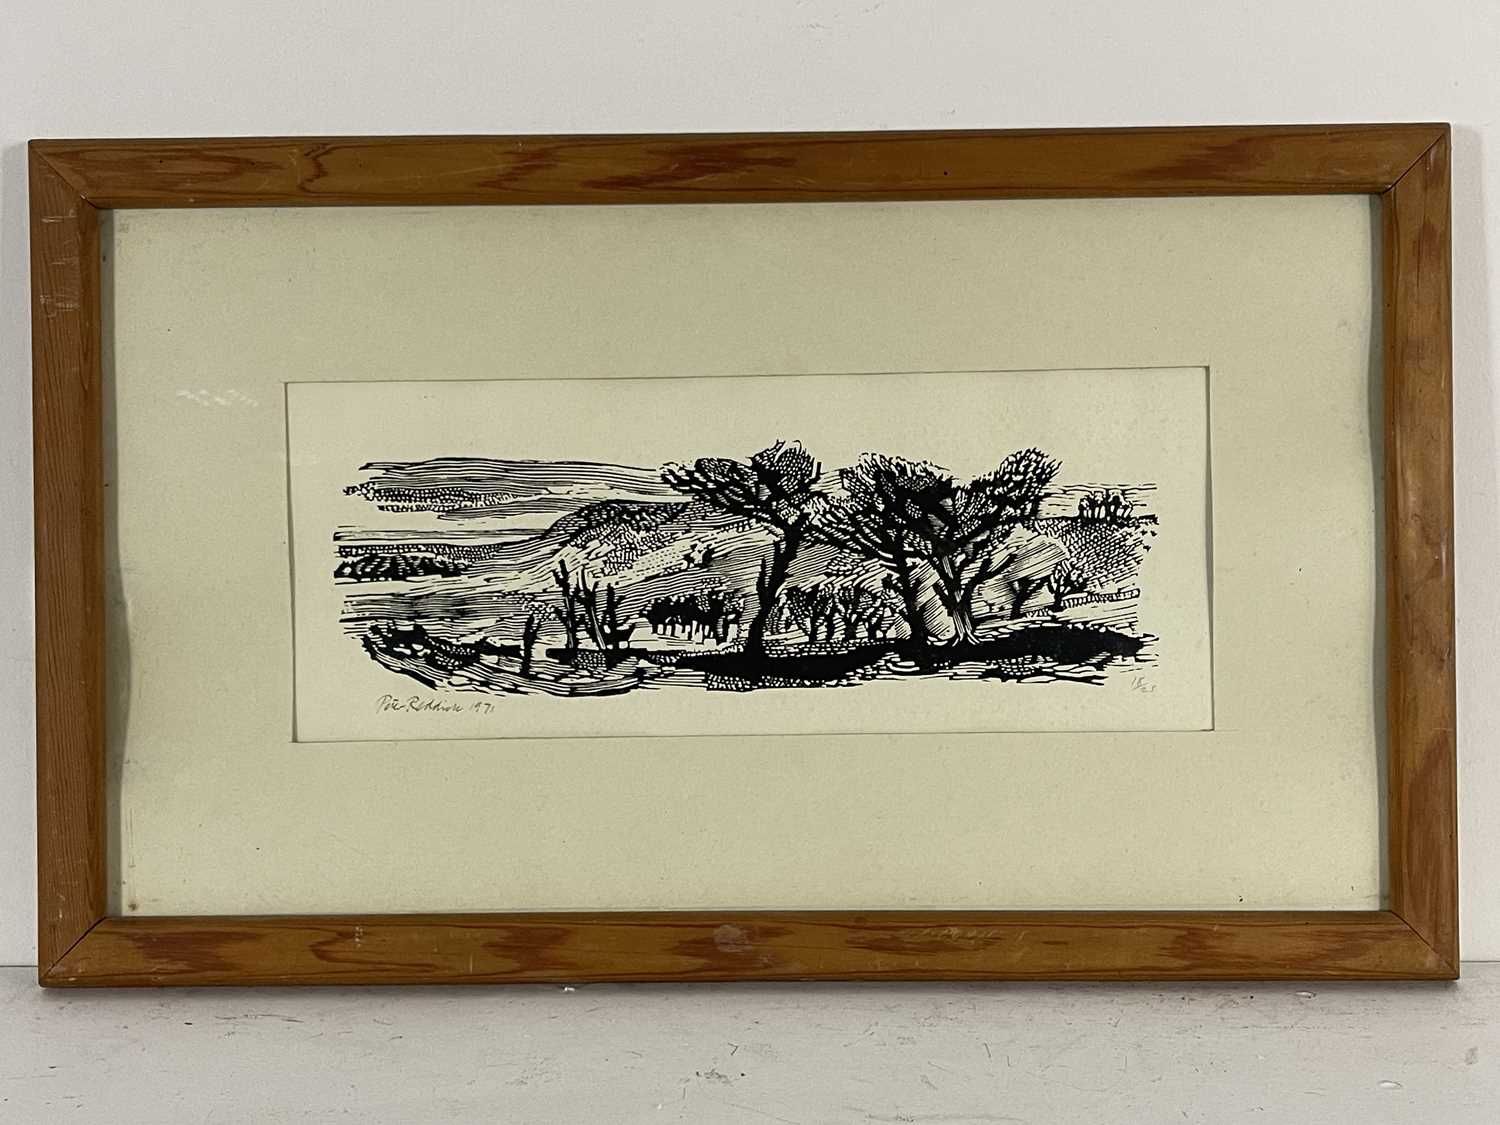 Peter Reddick (British, 1924-2010), landscape with trees, signed and dated 1971 l.l., woodcut, - Image 4 of 7